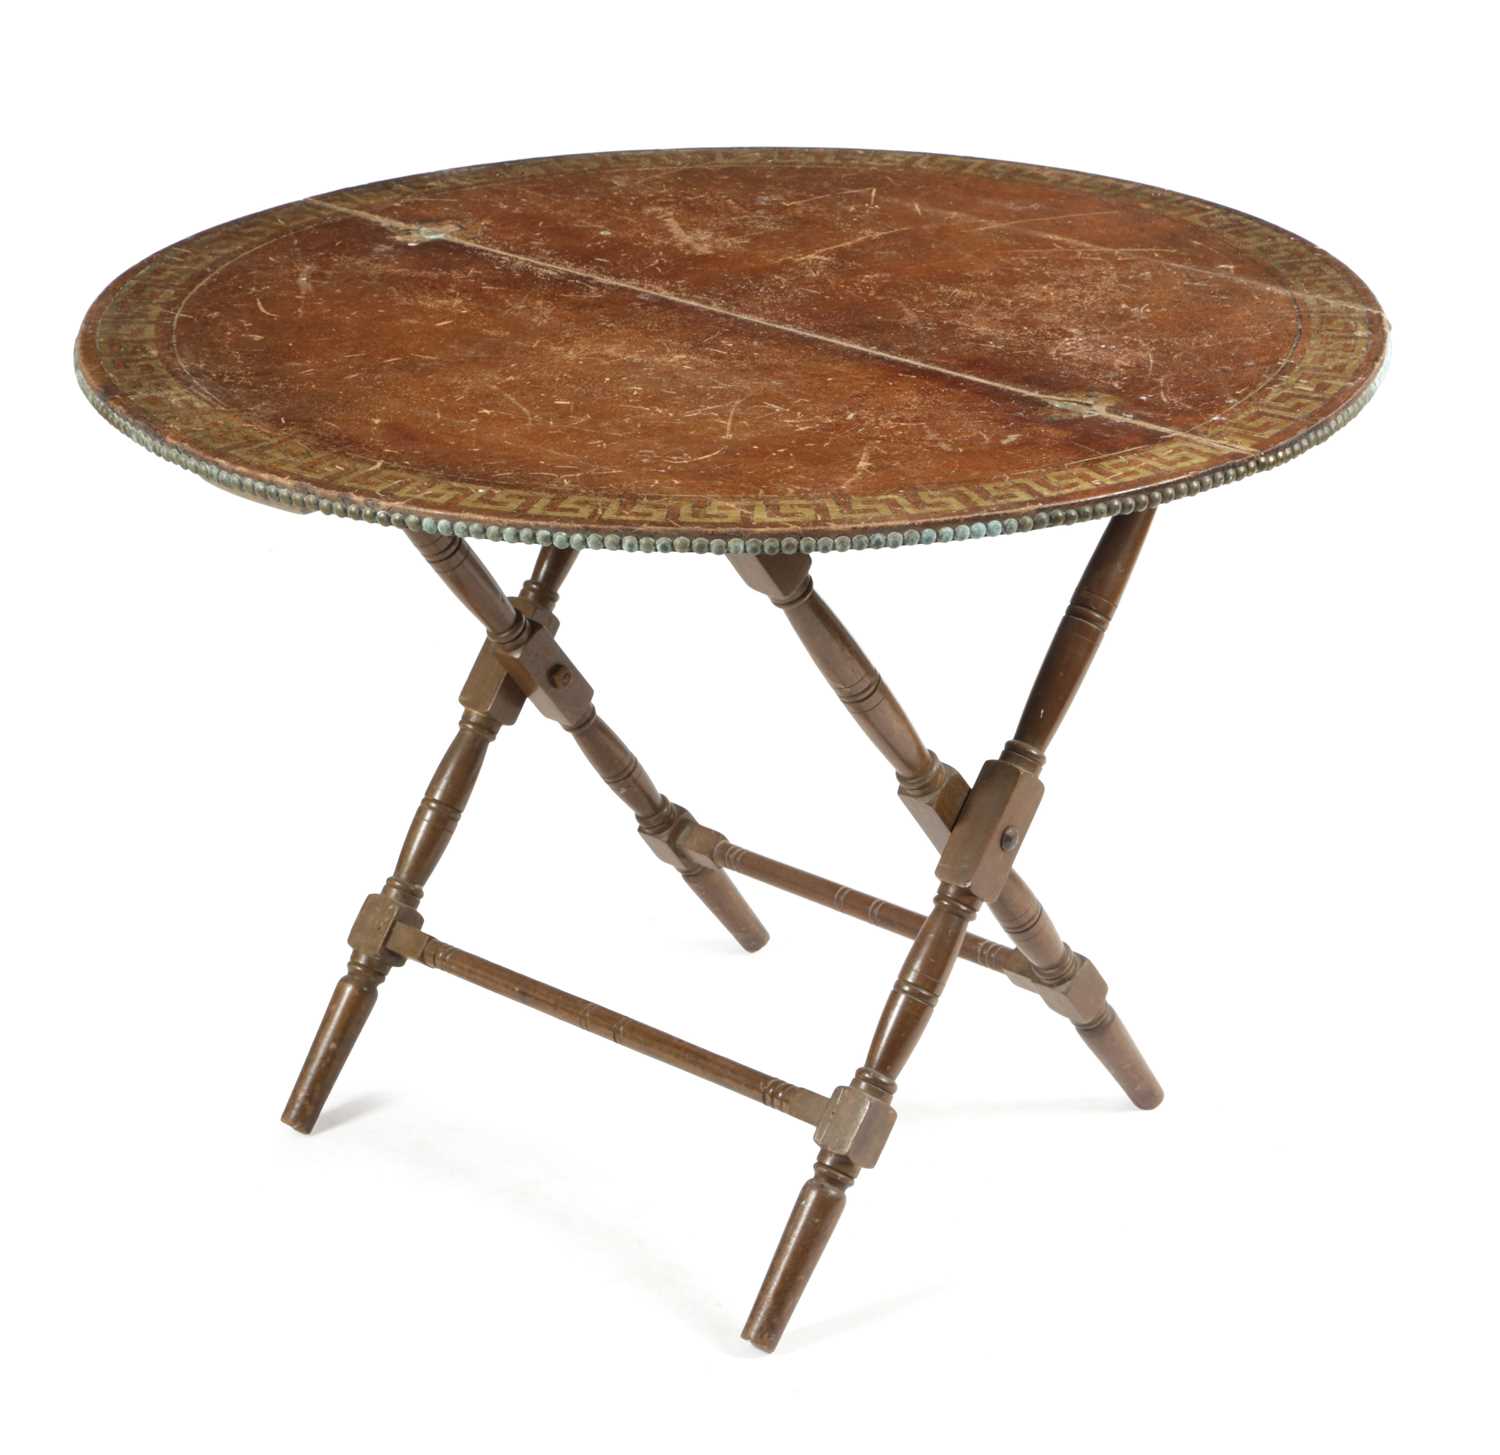 A WALNUT COACHING GAMES TABLE LATE 19TH / EARLY 20TH CENTURY the leather top with a gilt tooled